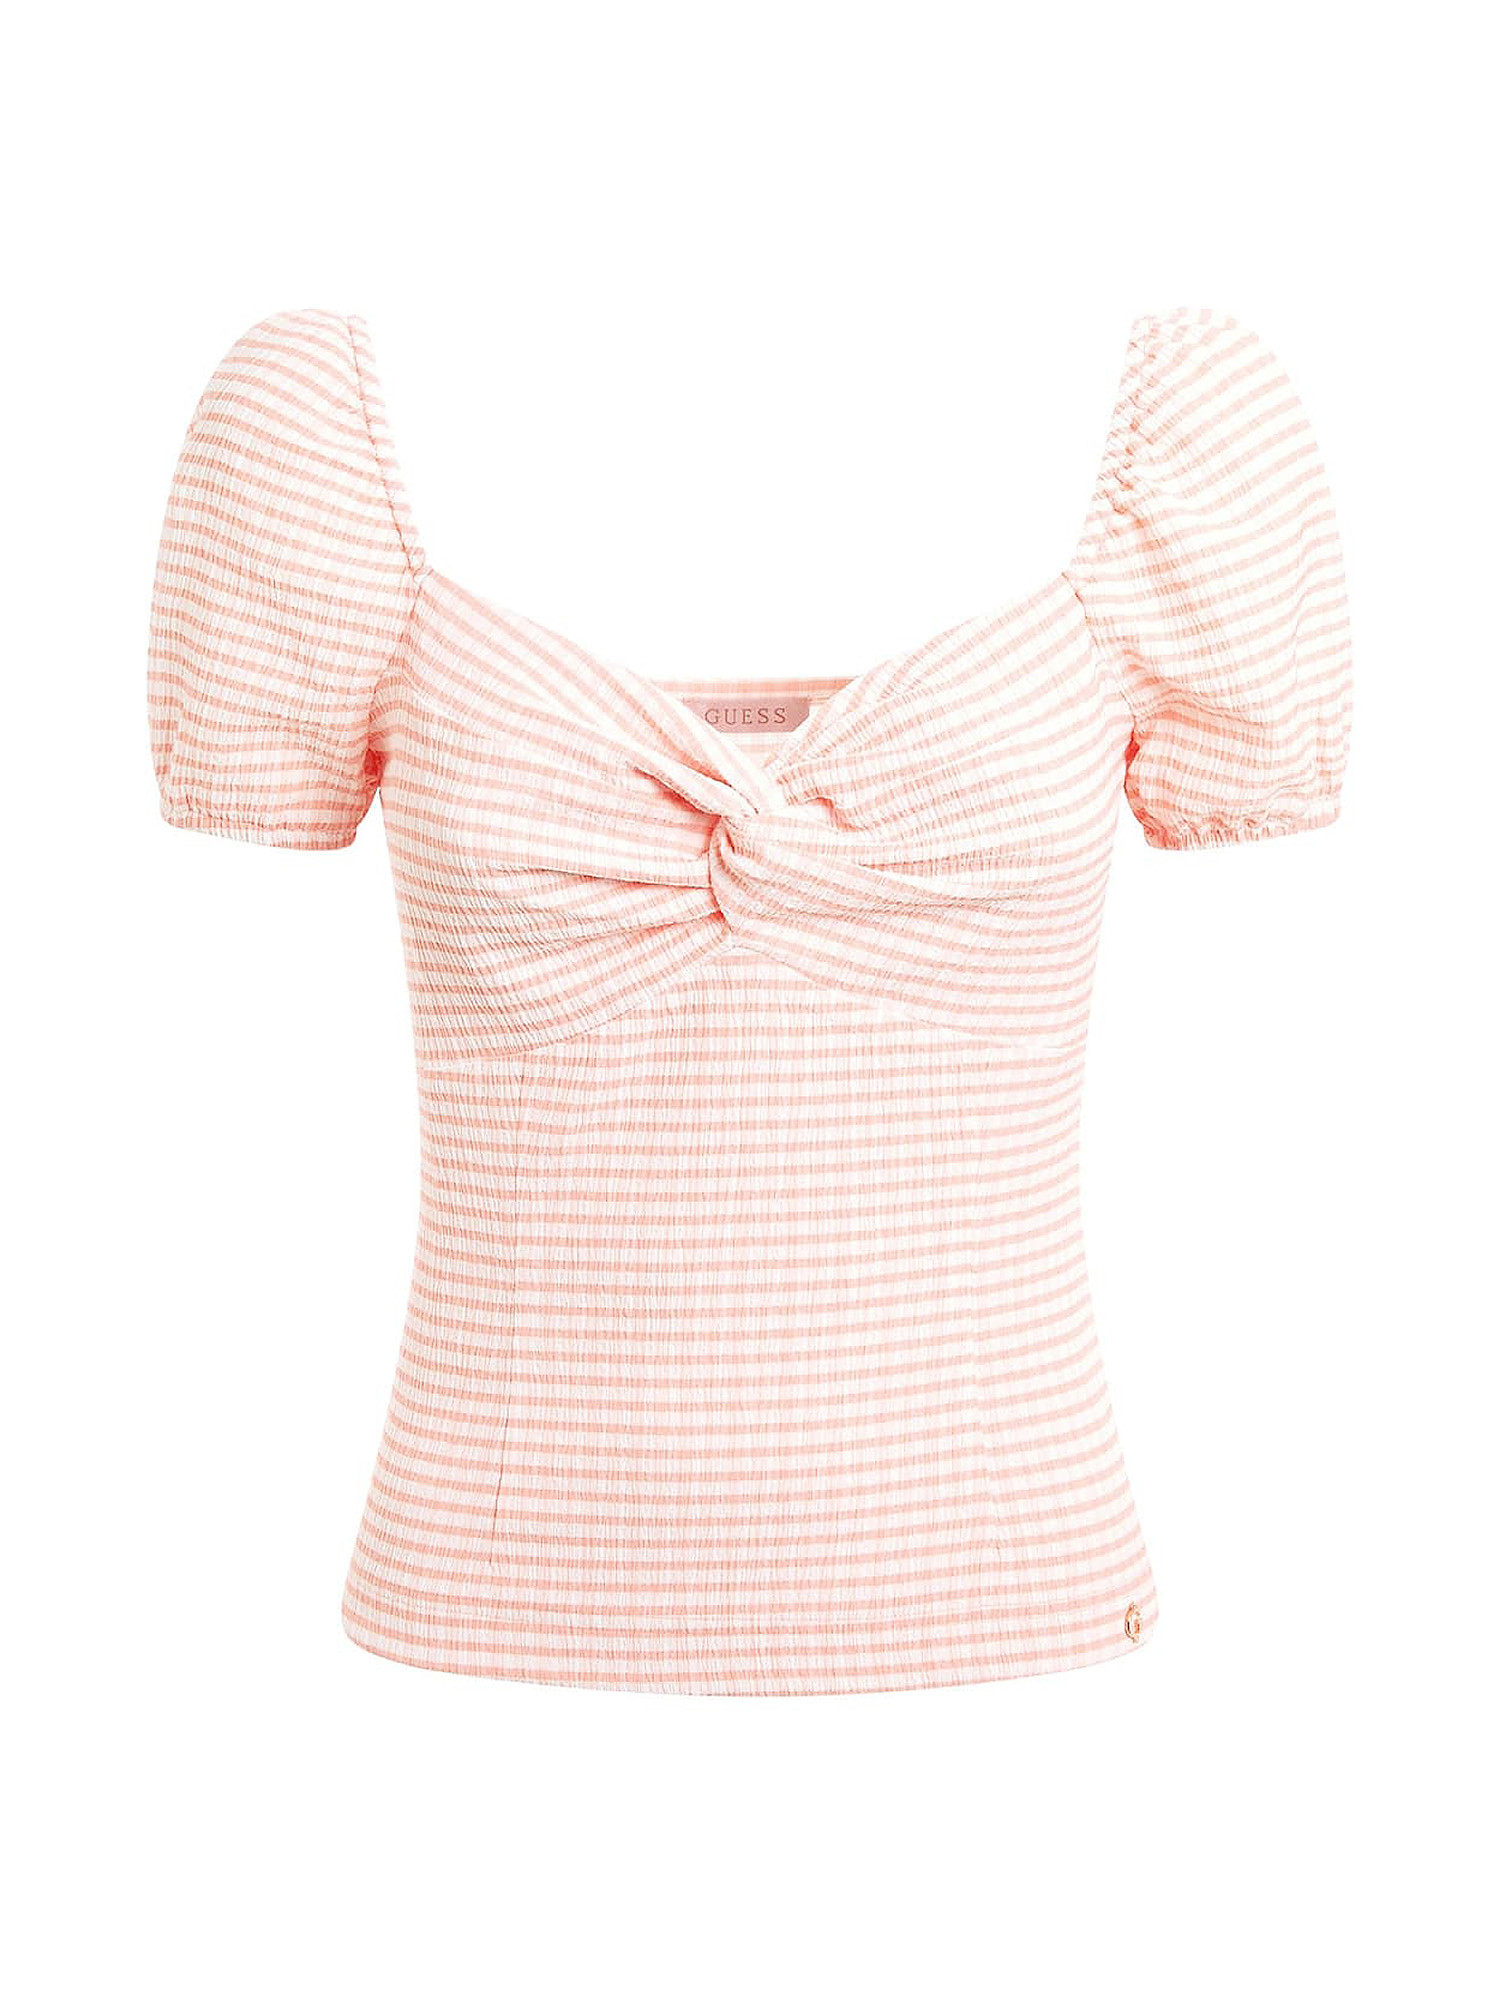 GUESS - Vichy patterned top, Pink, large image number 0